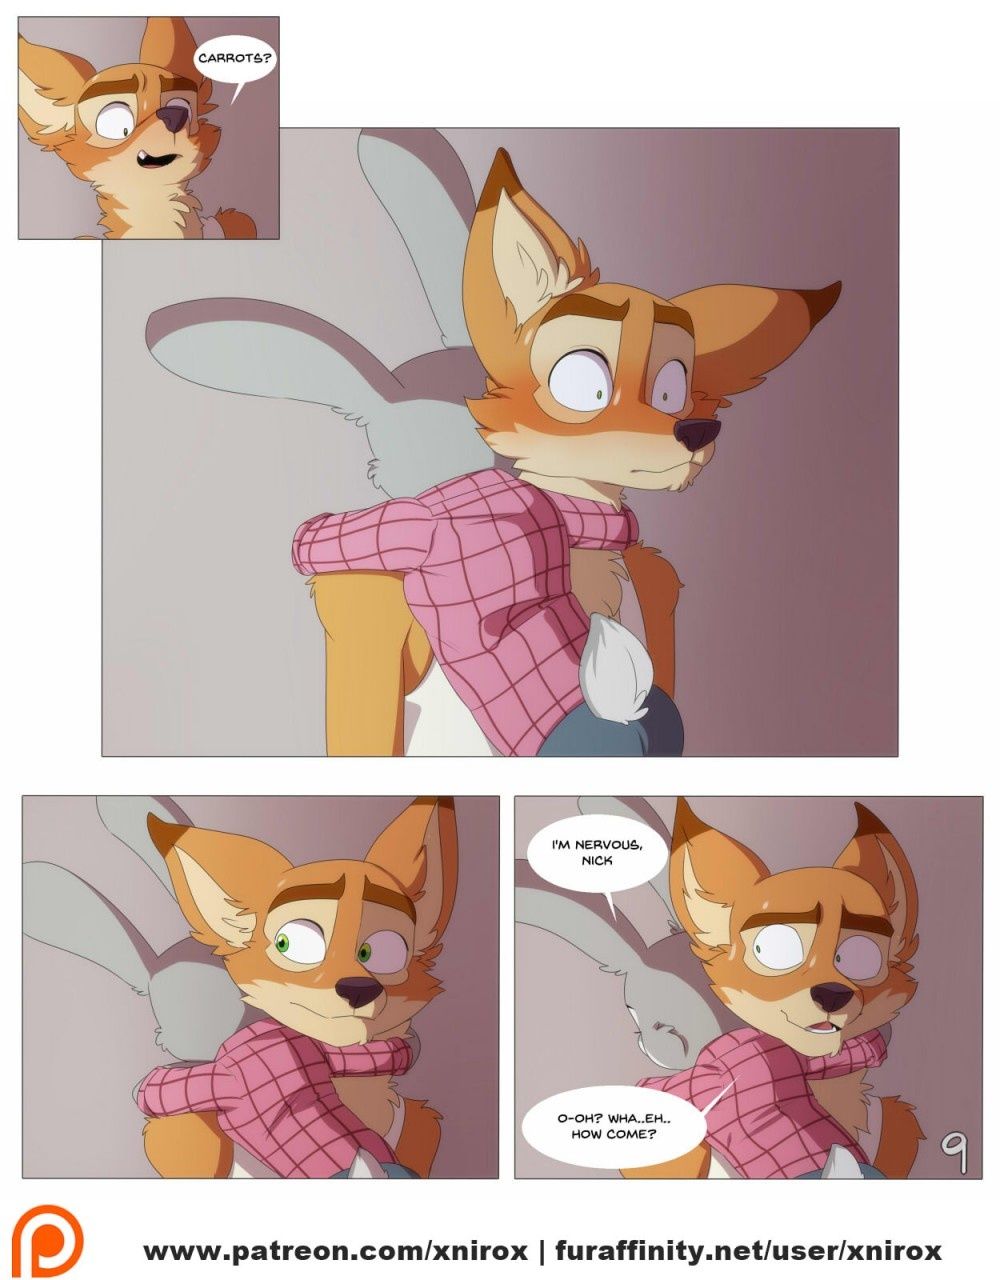 [Xnirox] Zootopia - Twitterpated, Furry Cartoon page 9